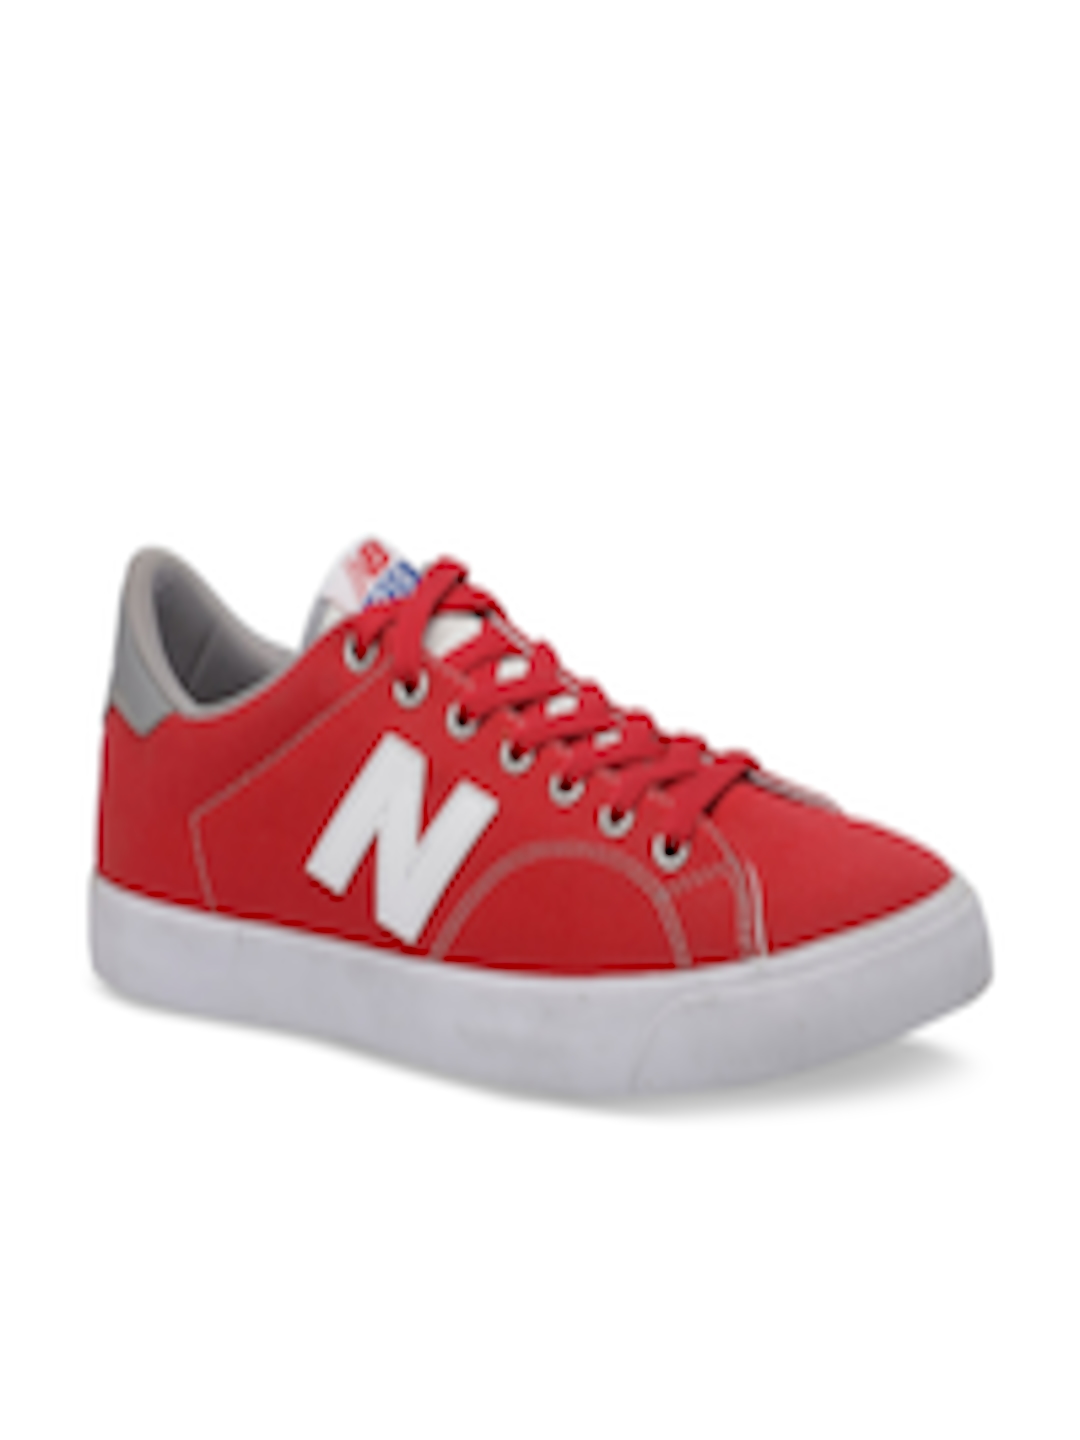 Buy New Balance Men Red Sneakers - Casual Shoes for Men 12286996 | Myntra